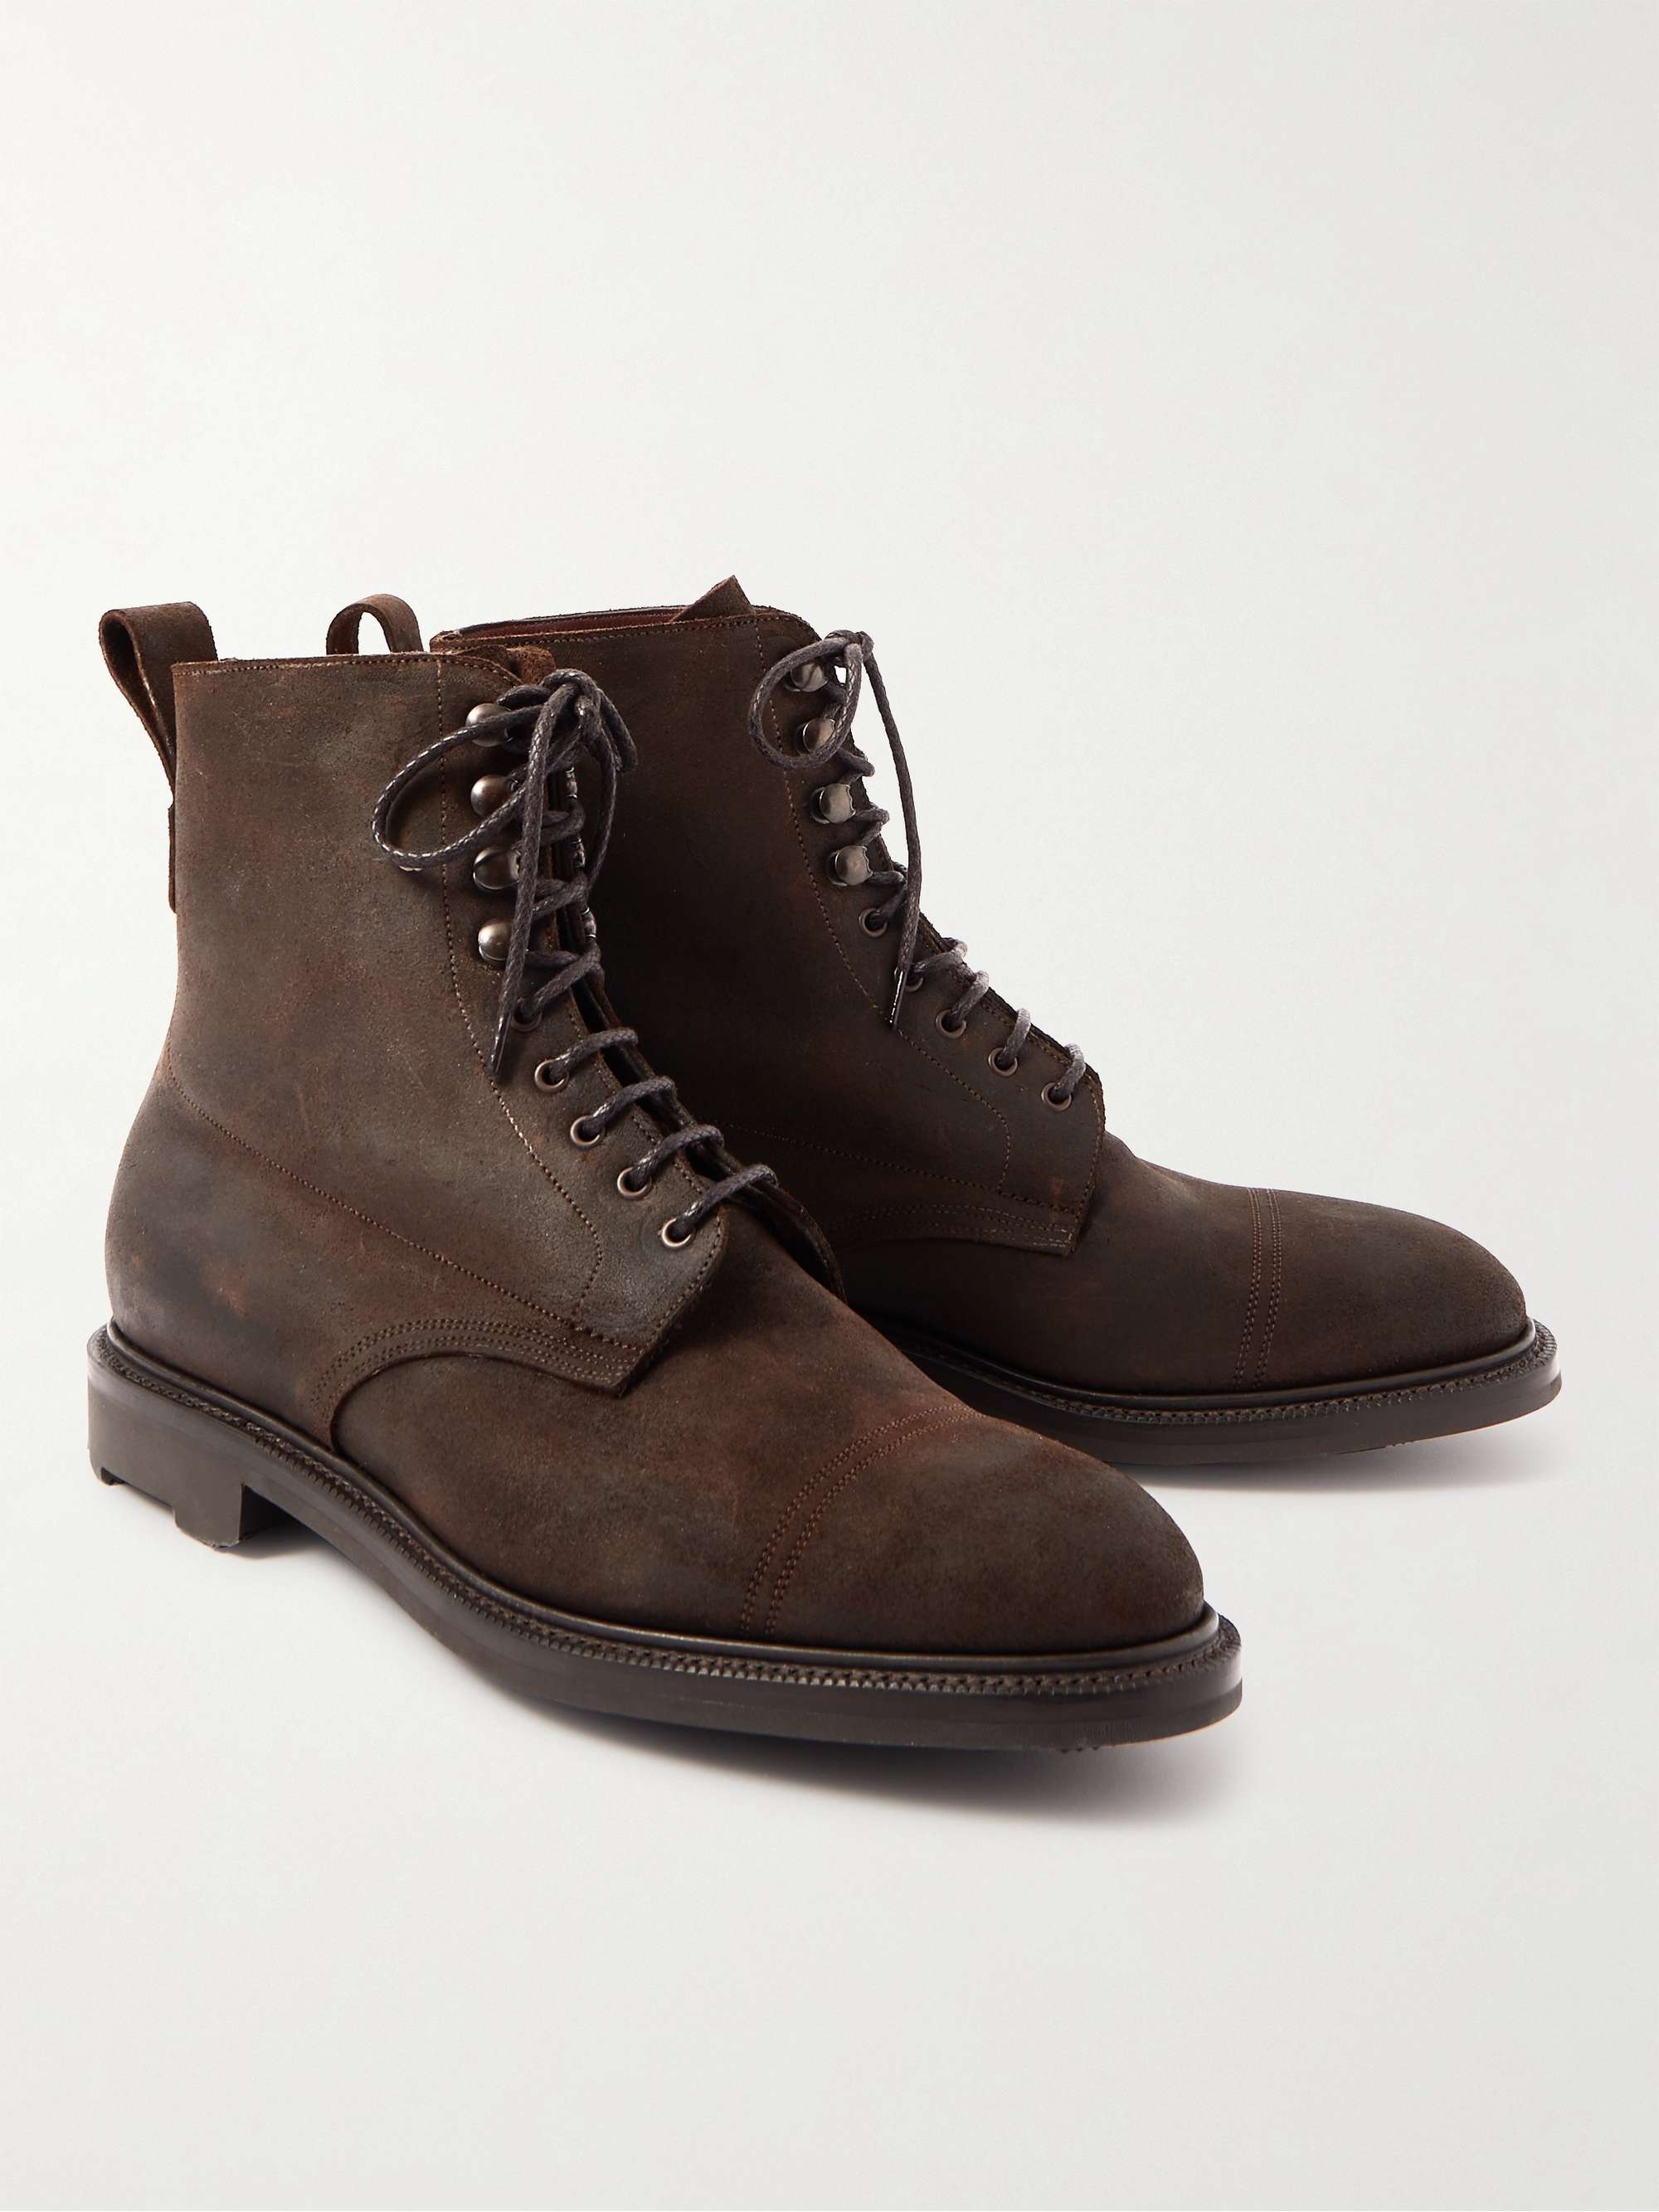 EDWARD GREEN Ambleside Waxed-Suede Lace-Up Boots